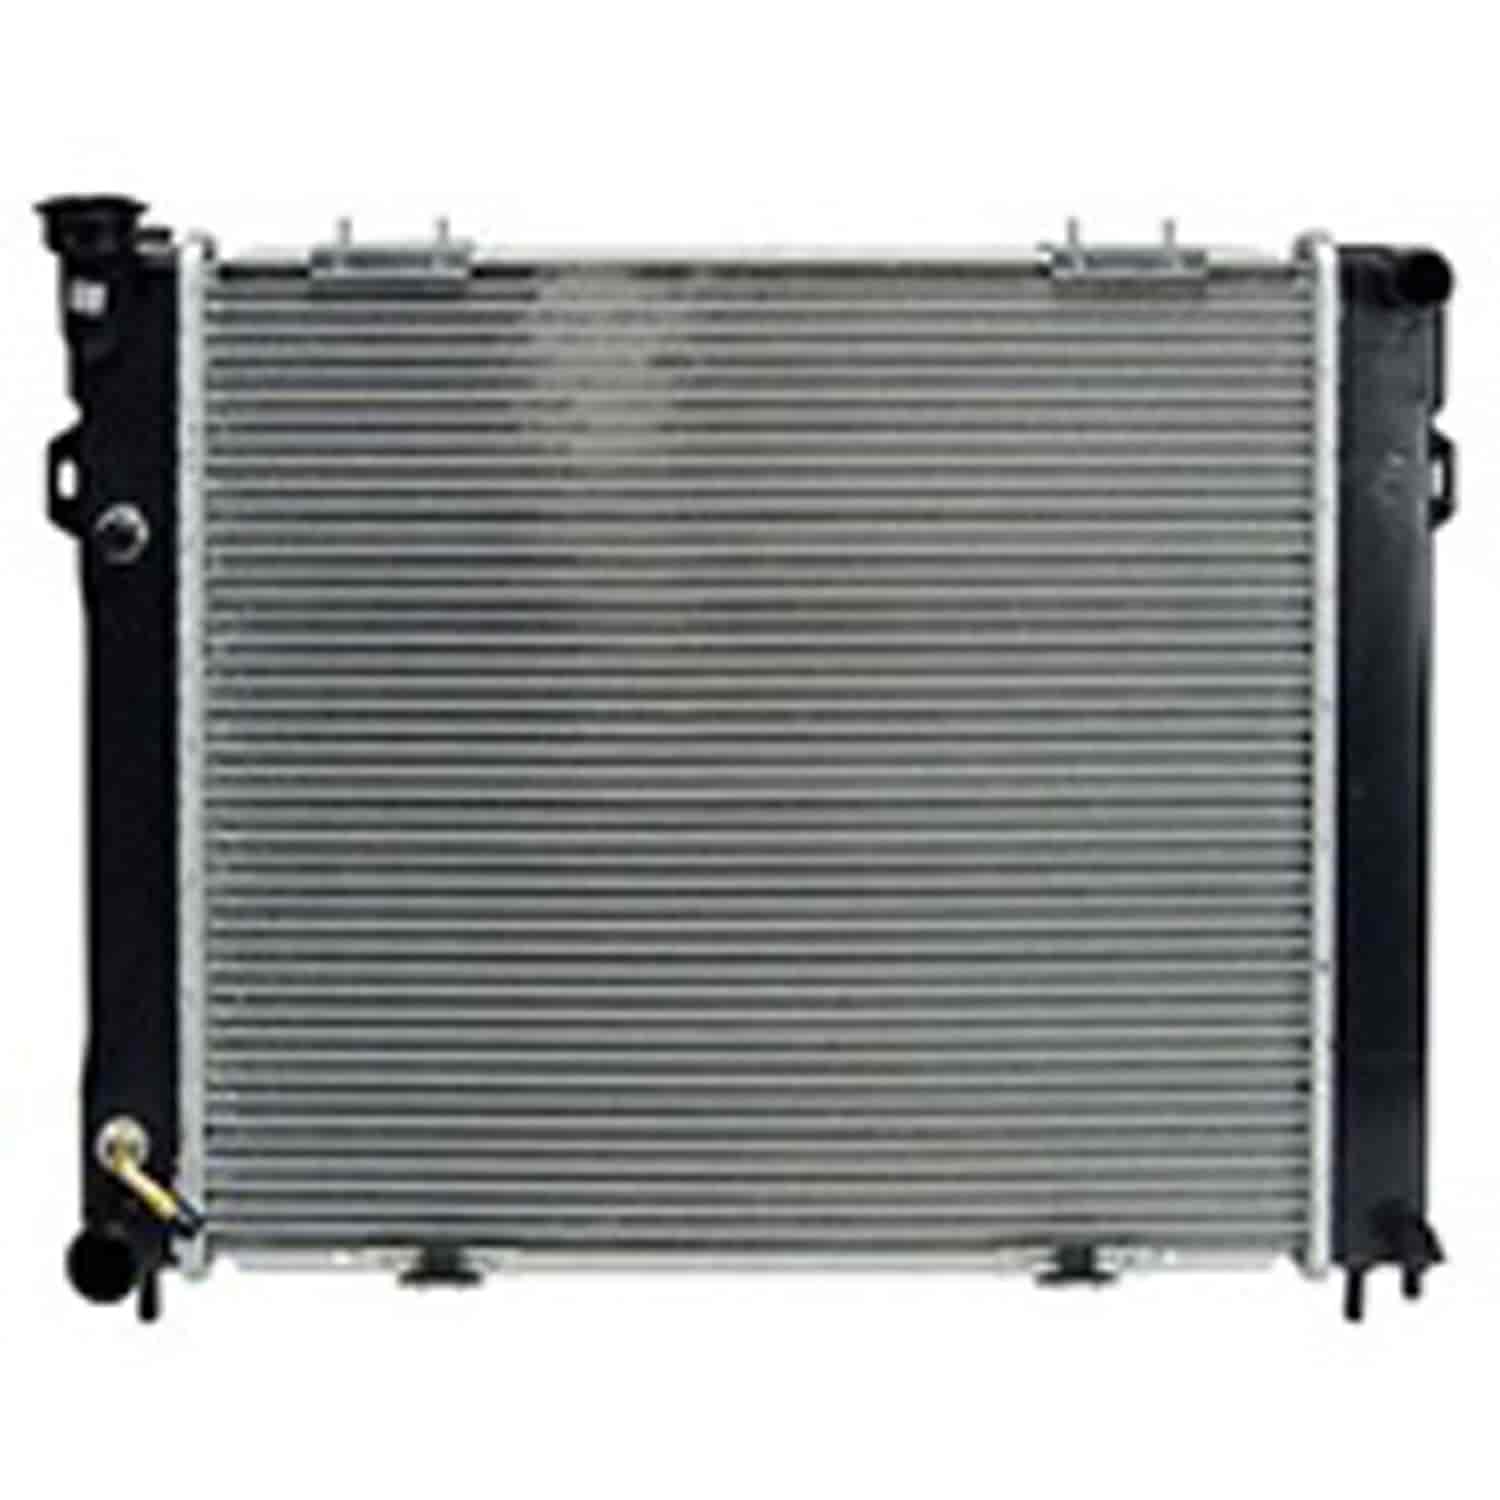 This 1 row radiator from Omix-ADA fits 93-94